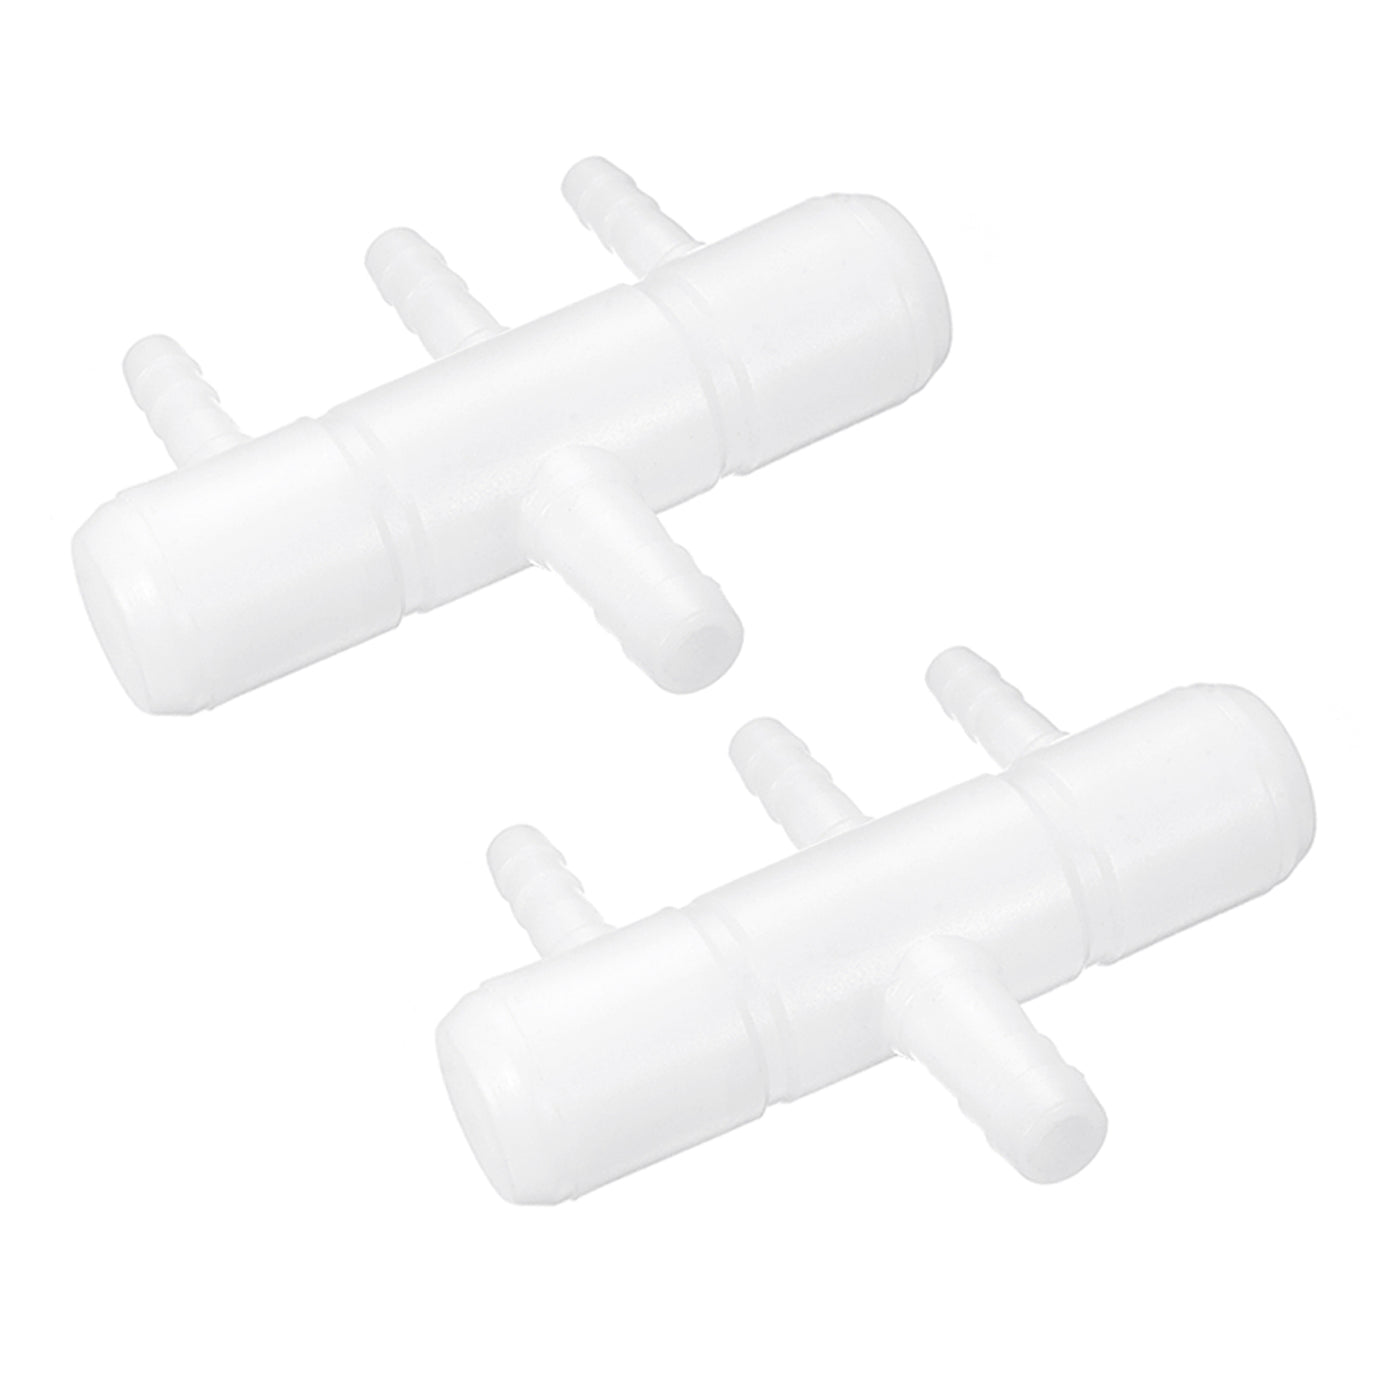 uxcell Uxcell Air Line Tubing Splitter Connector, 2Pcs 8mm/0.31" to 5mm/0.2" 3 Way, White